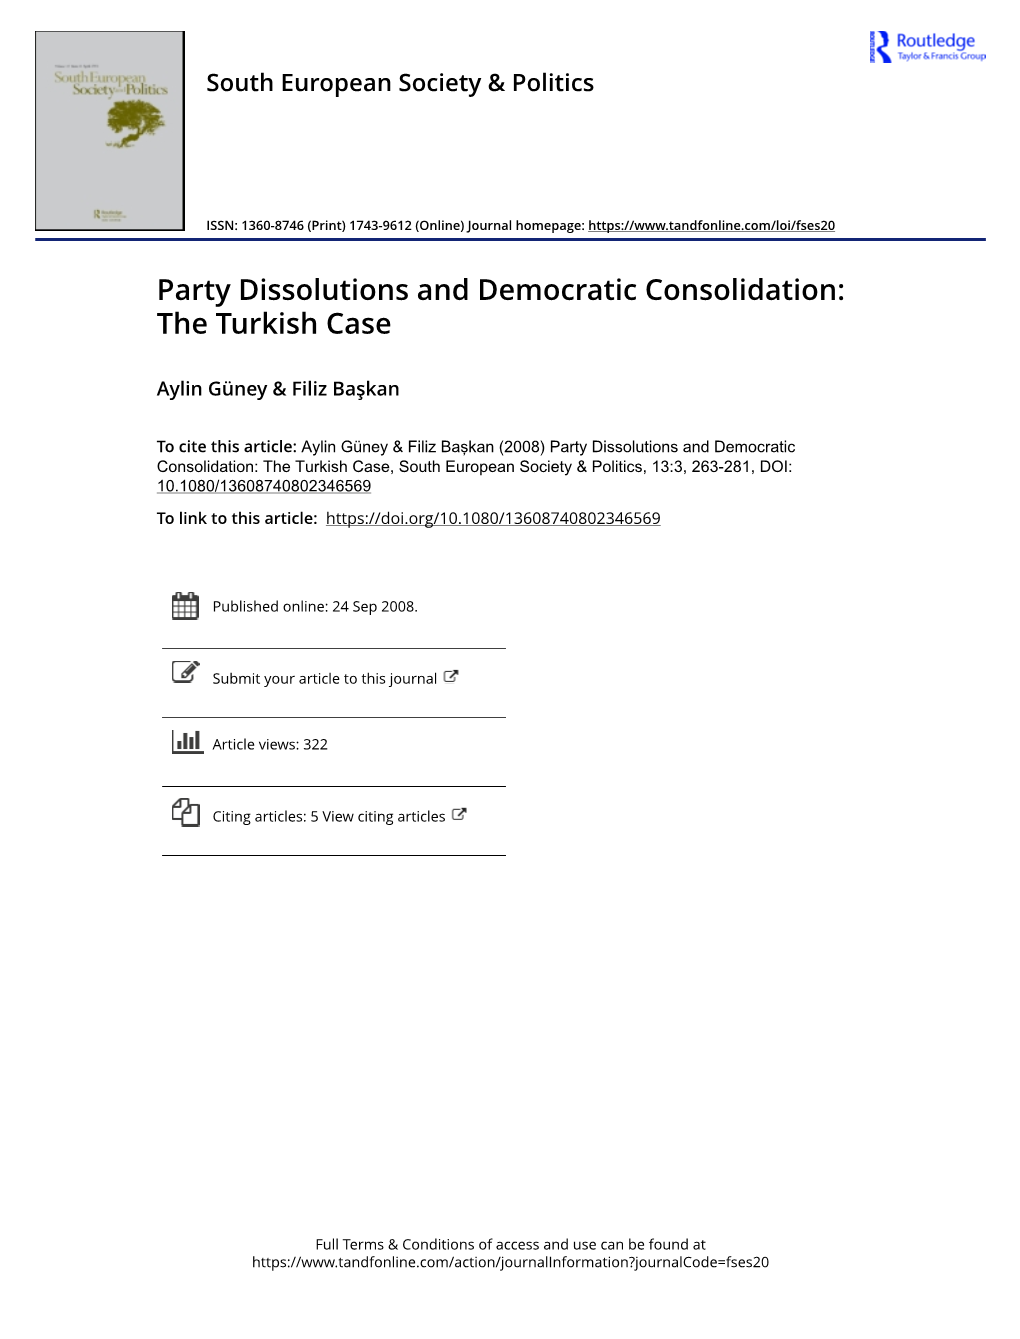 Party Dissolutions and Democratic Consolidation: the Turkish Case